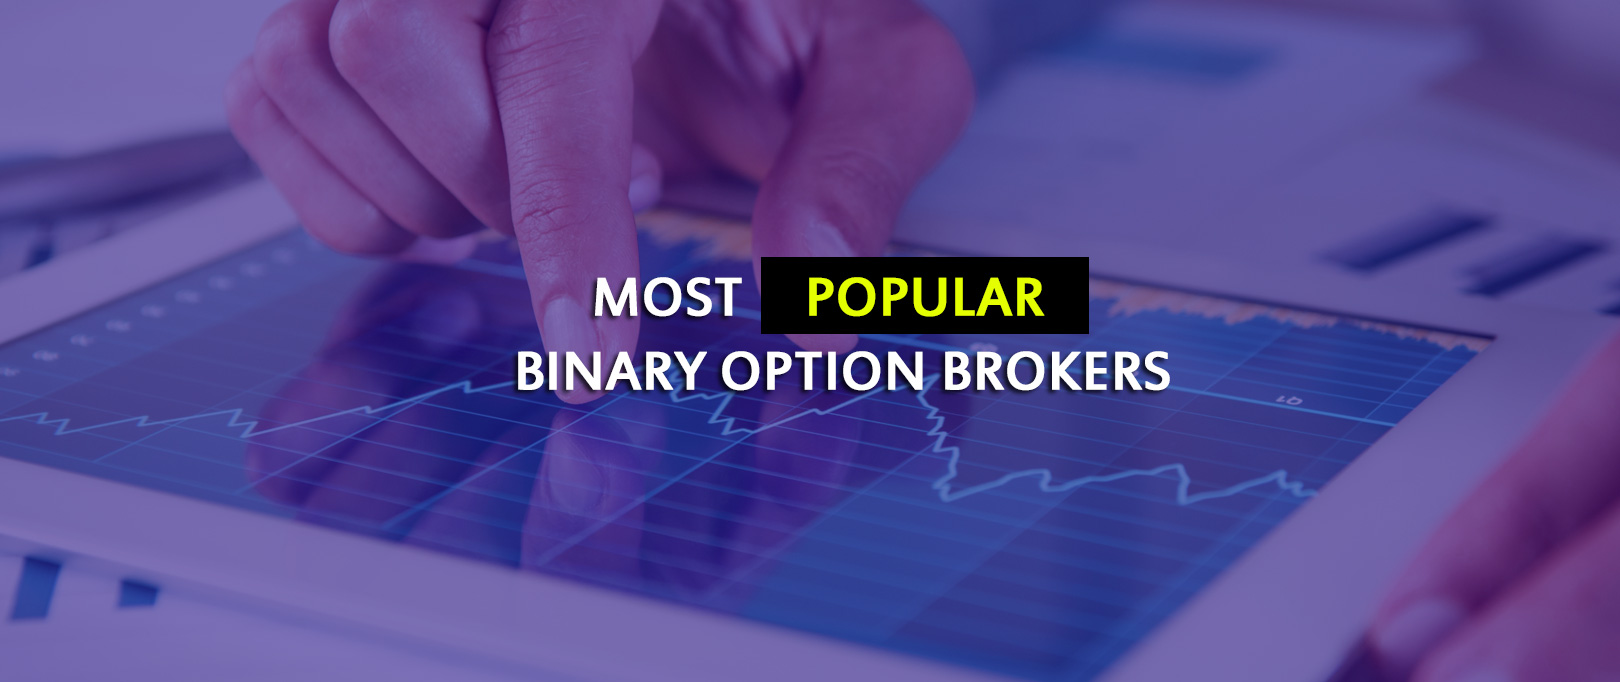 iq option and other regulated brokers in sinhala for sri lankans by Prathilaba